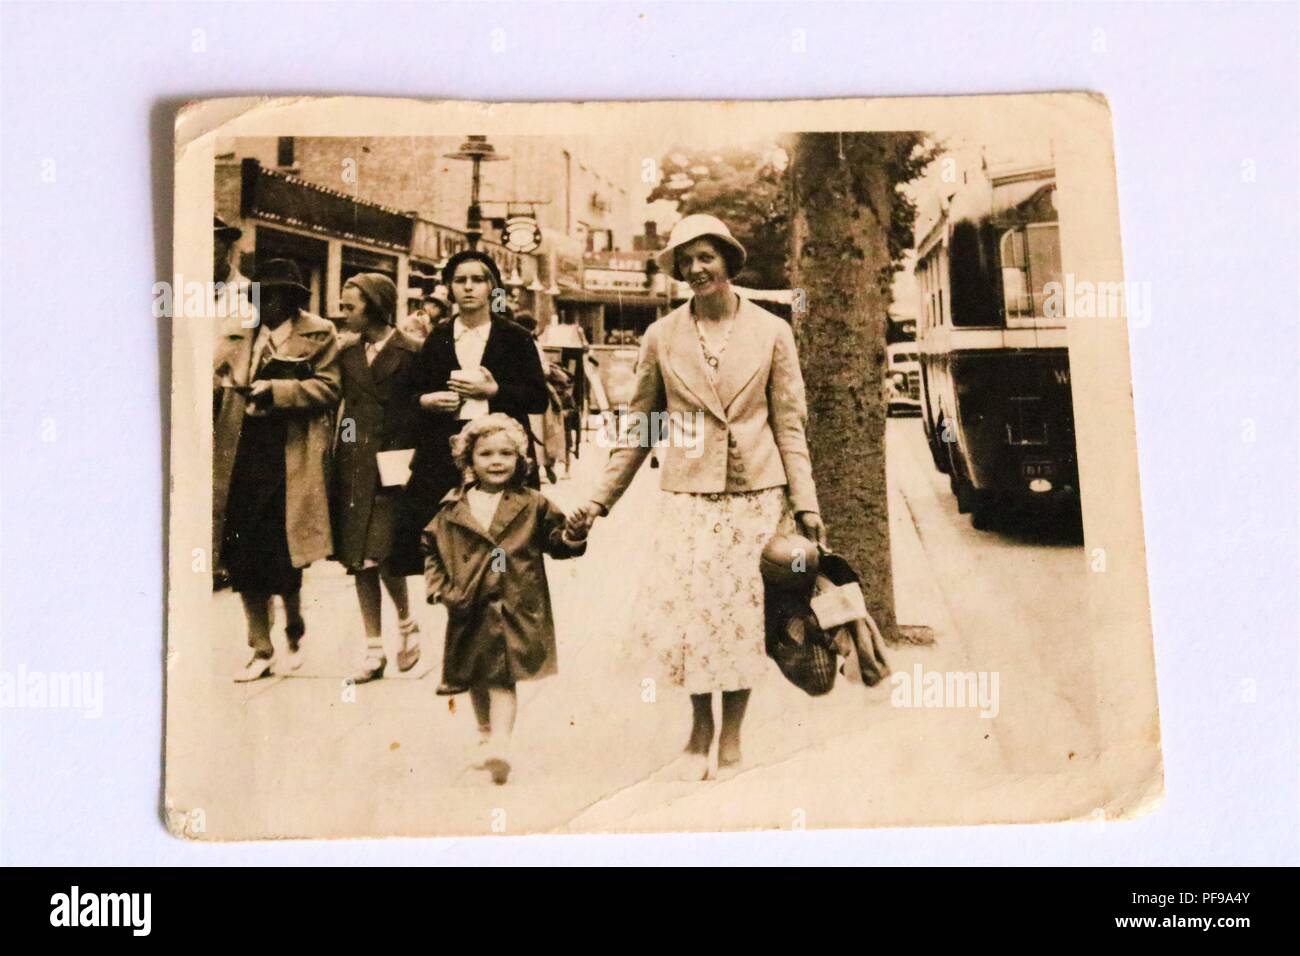 Social History - Black and white old photograph showing an elegant lady wearing a hat and holding hand of child walking in the street - 1930s Stock Photo